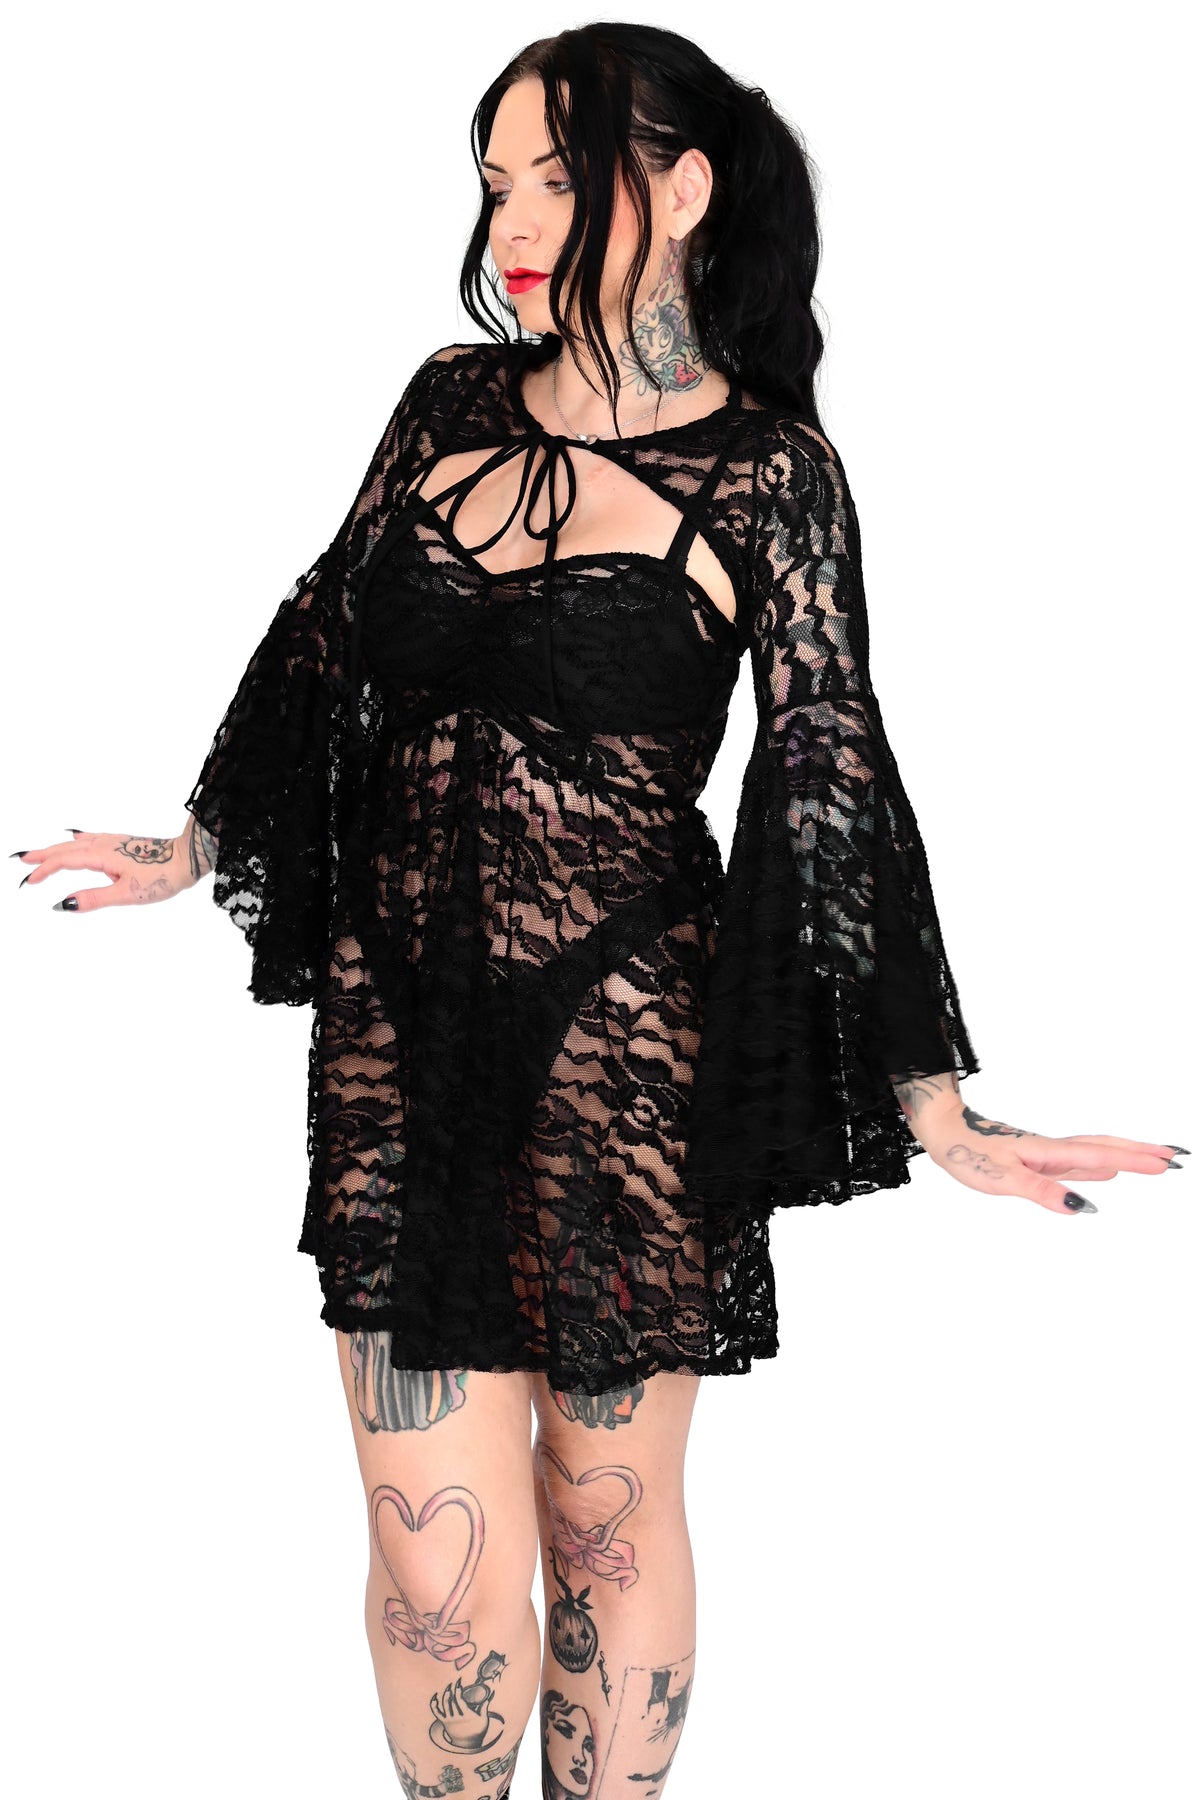 sheer lace babydoll dress with spaghetti straps